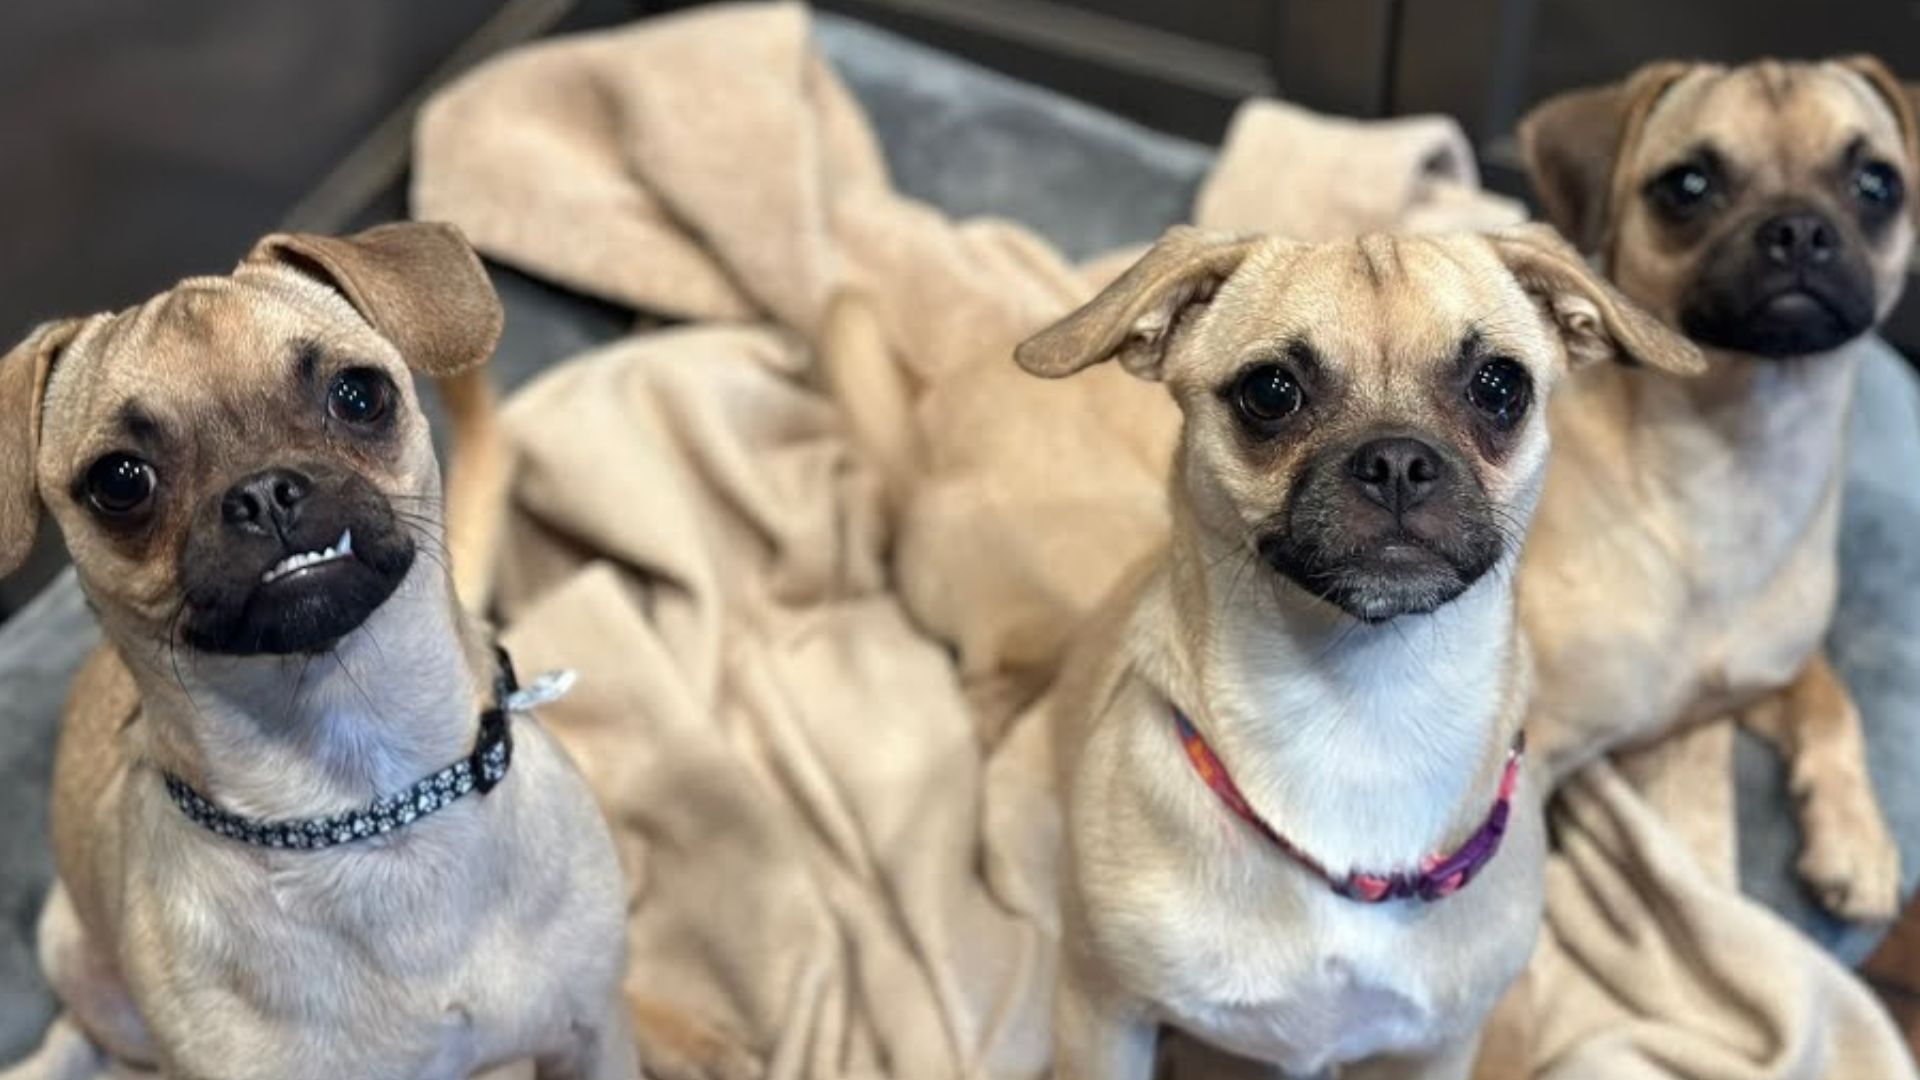 Sweetest Pug Siblings Decided To Stay Together After Being Cruelly Dumped At An Elementary School